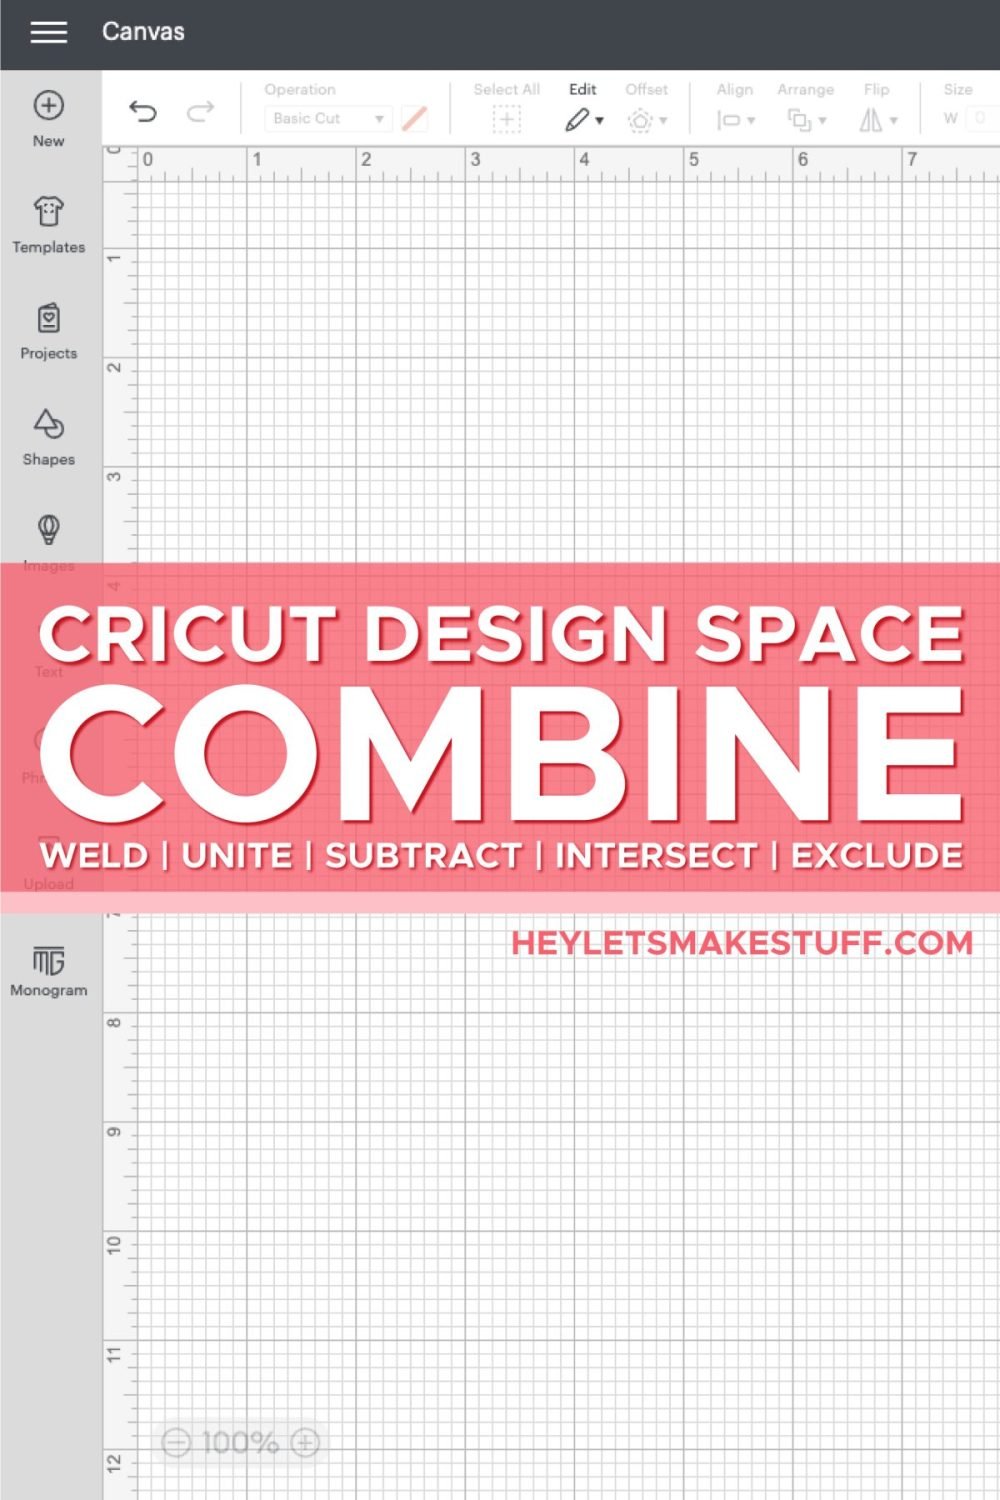 Design Space Canvas with "Cricut Design Space Combine Tools" on pink bar